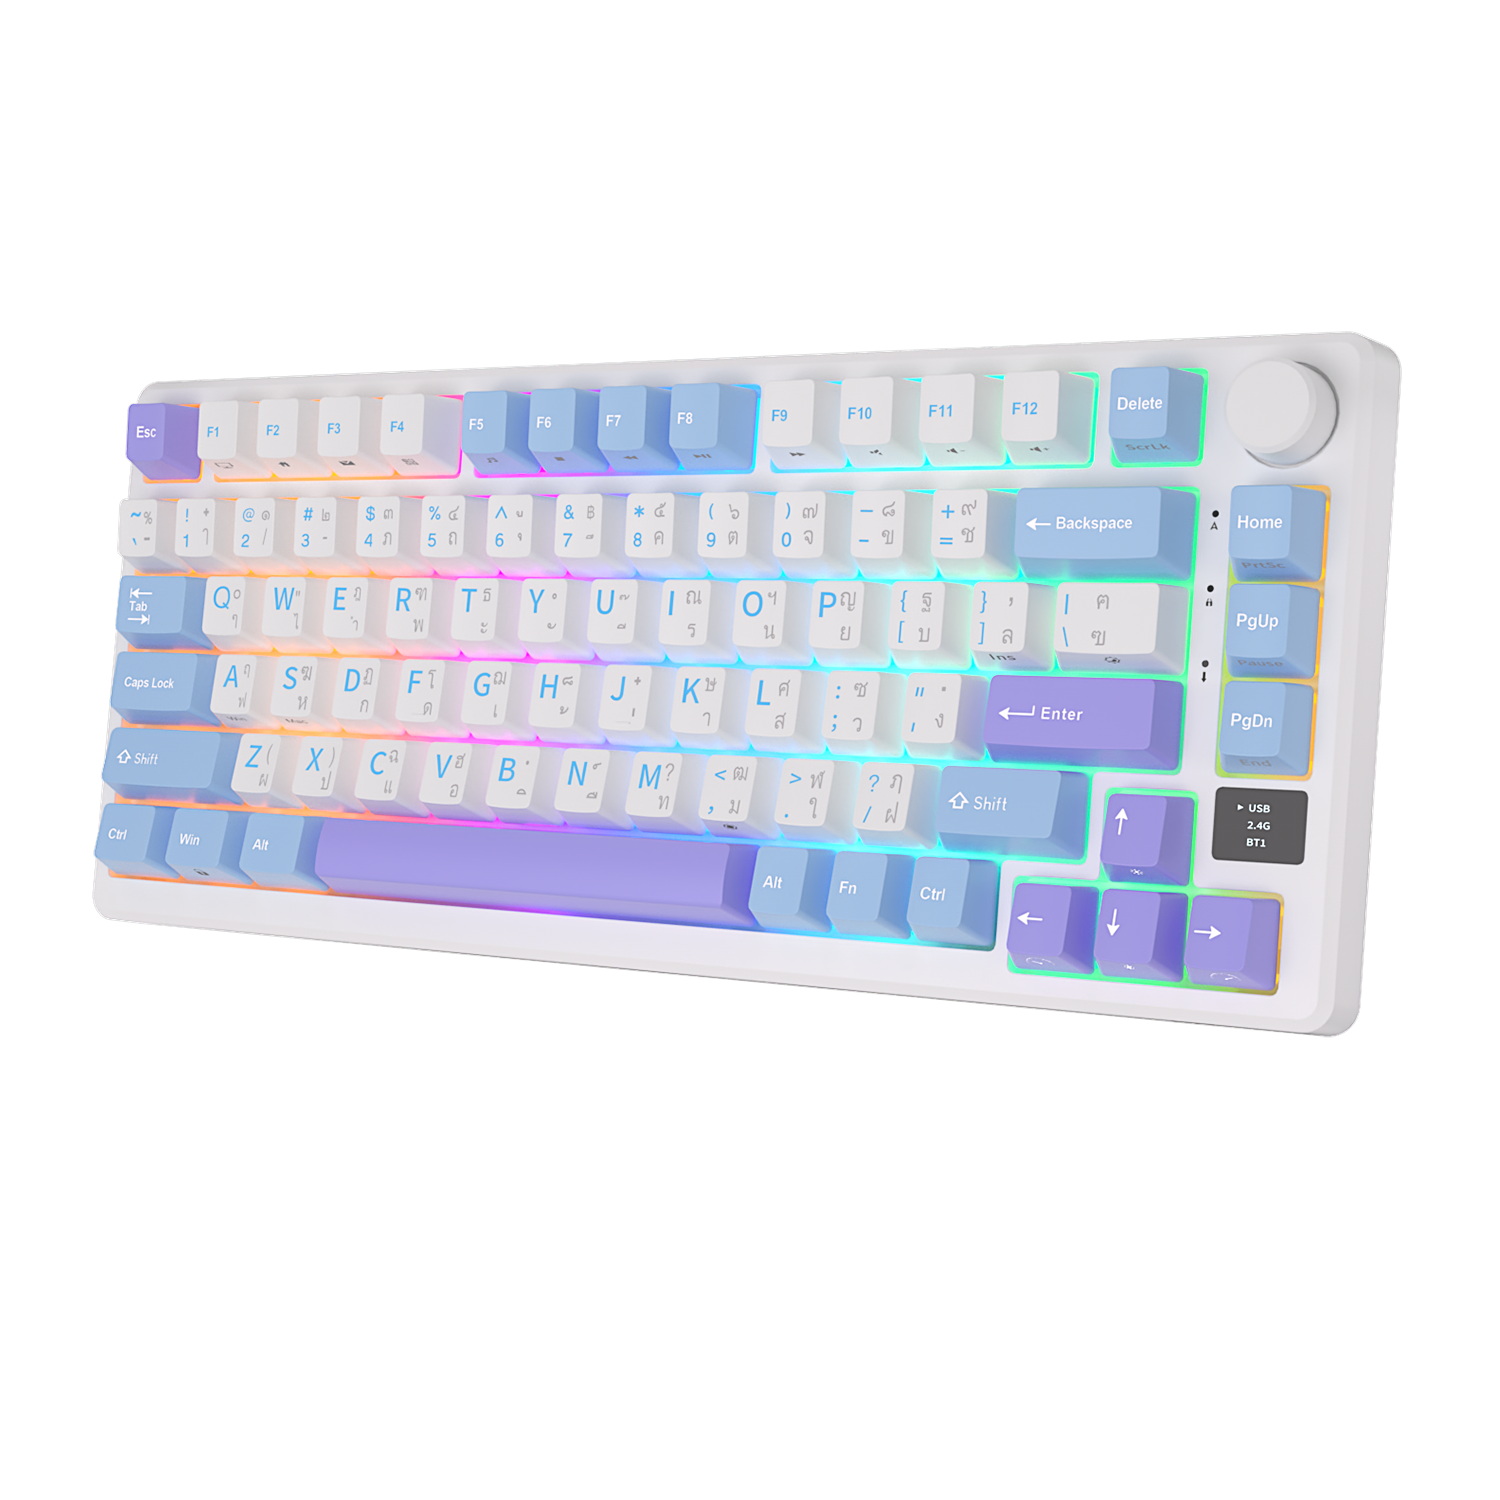 Taro Milk Royal Kludge M75 (RKM75) Keyboard with  sky blue, lavender and white keys, soft pastel aesthetic. 